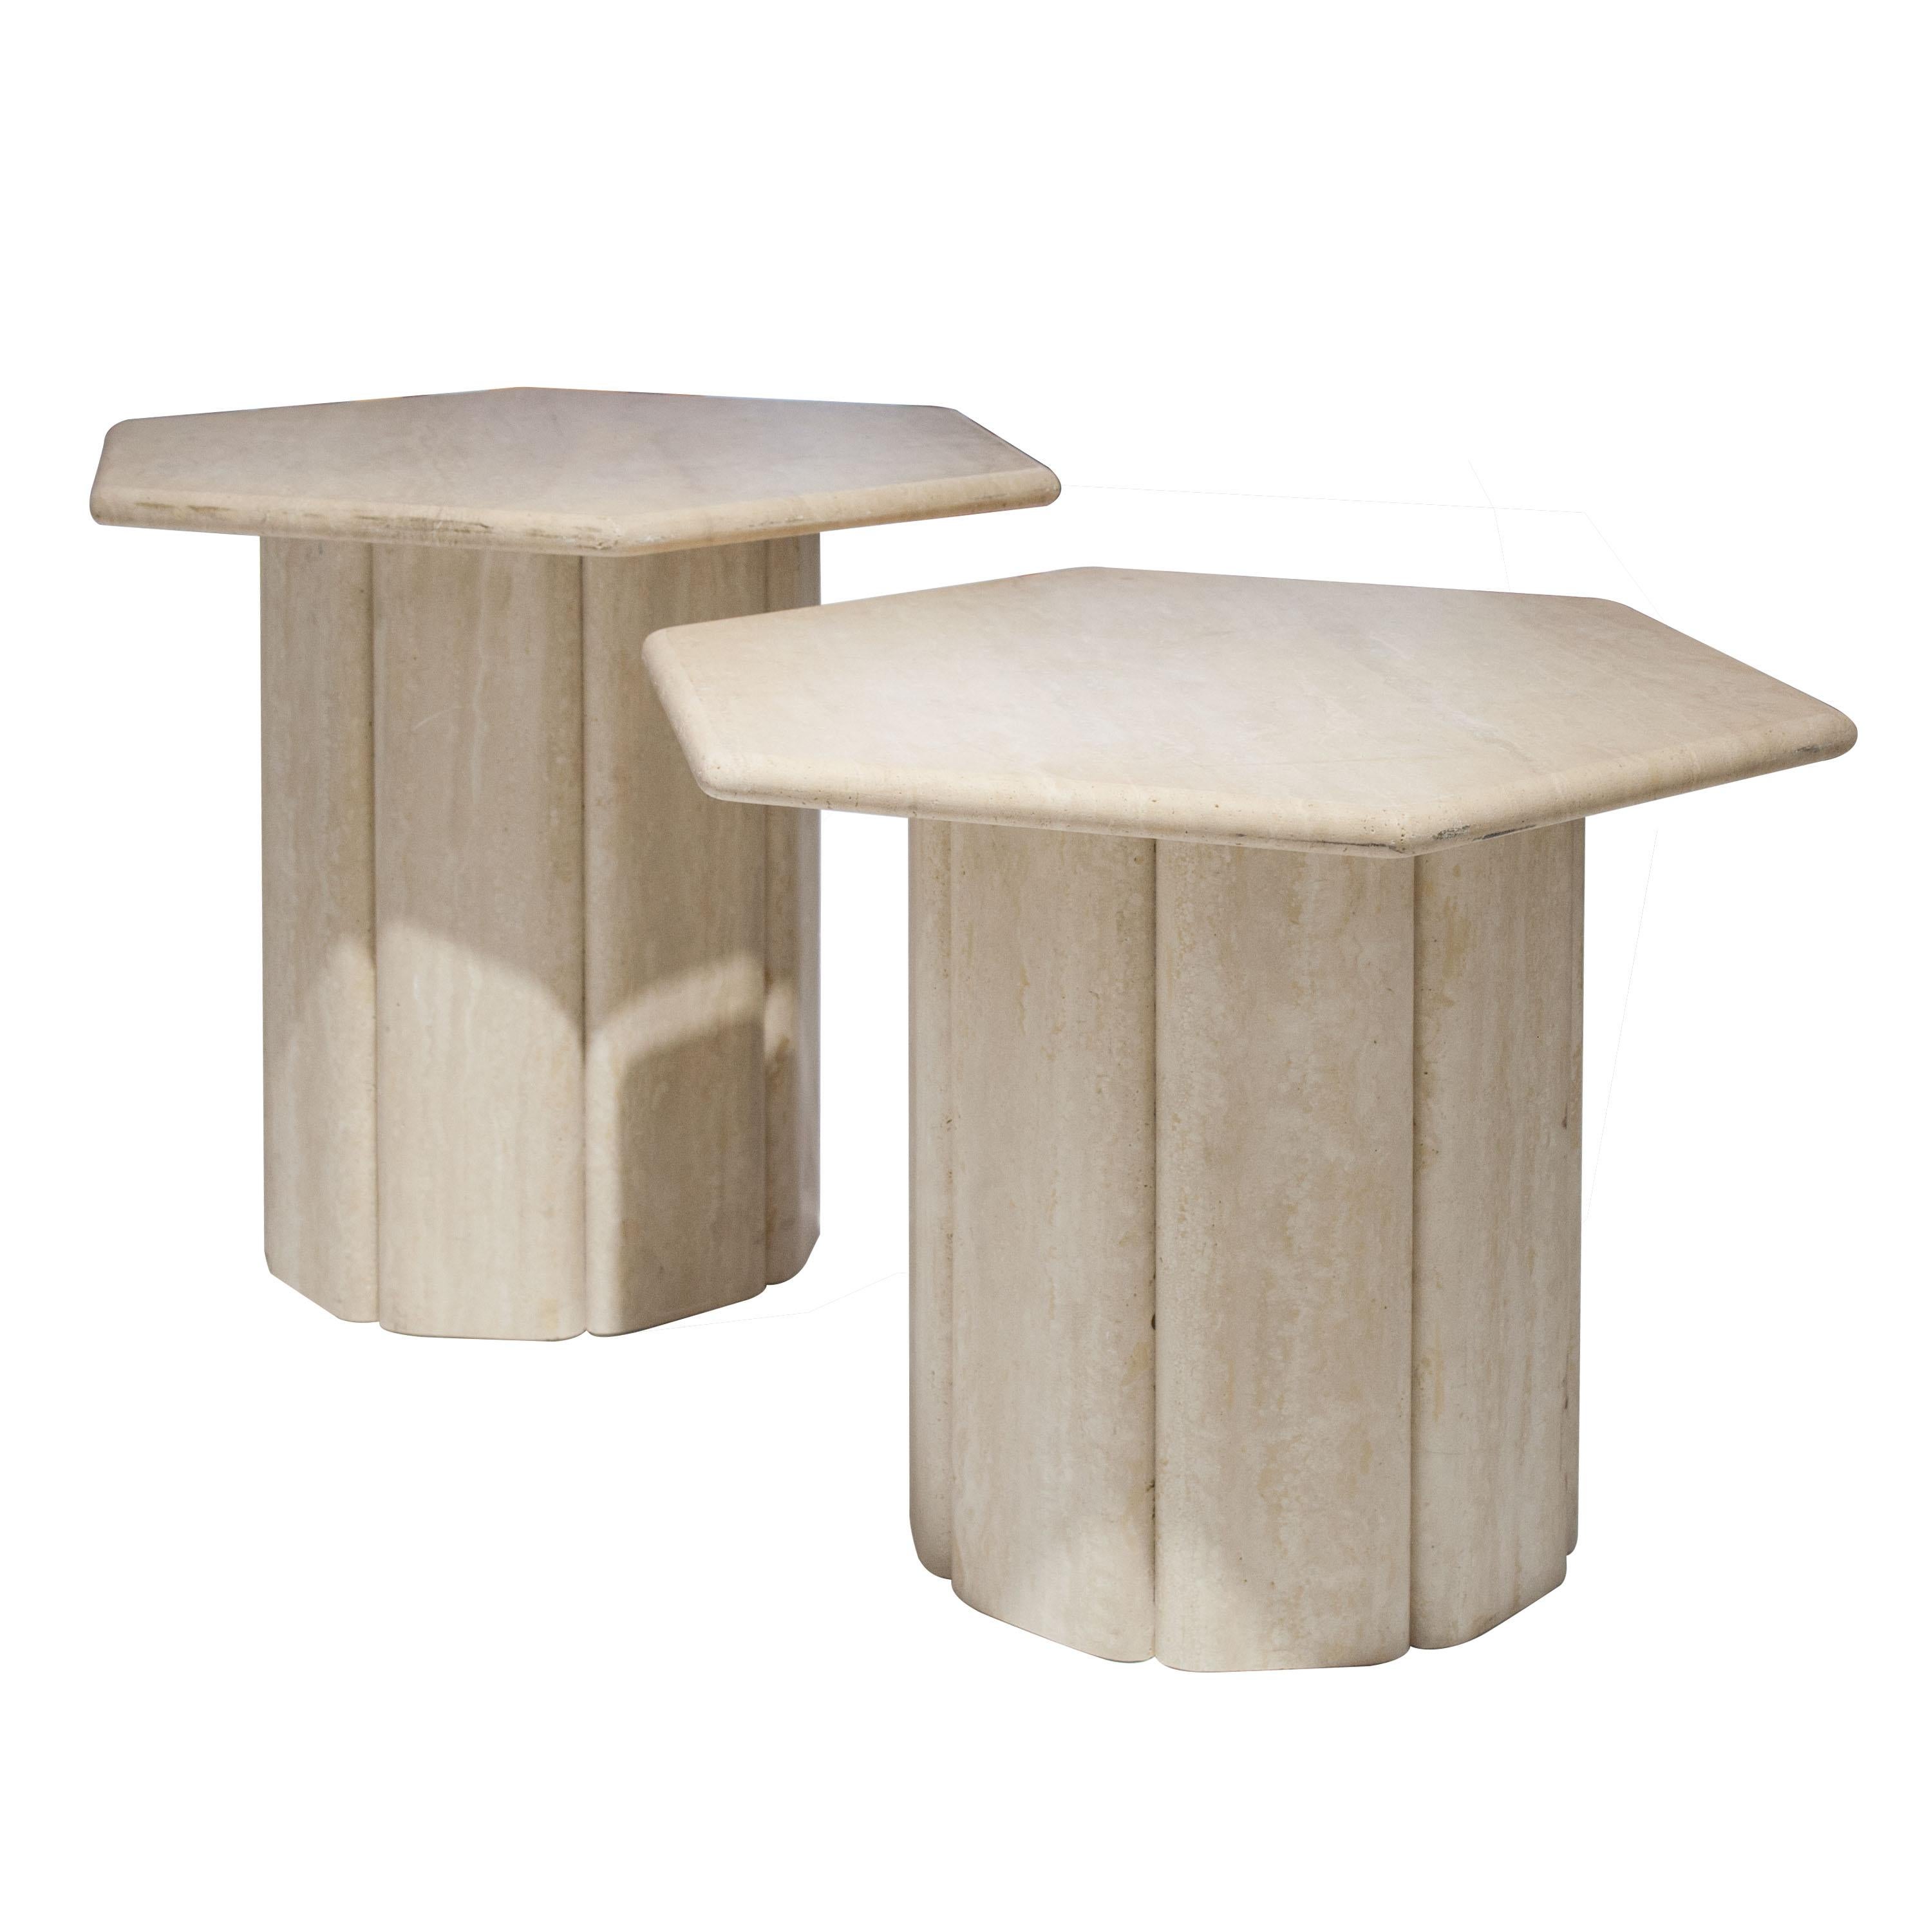 Set of two side tables made of travertine marble. Faceted cylinder base with hexagon shaped top. Two different heights (47/42 cm; 18,5/16,5 inches).